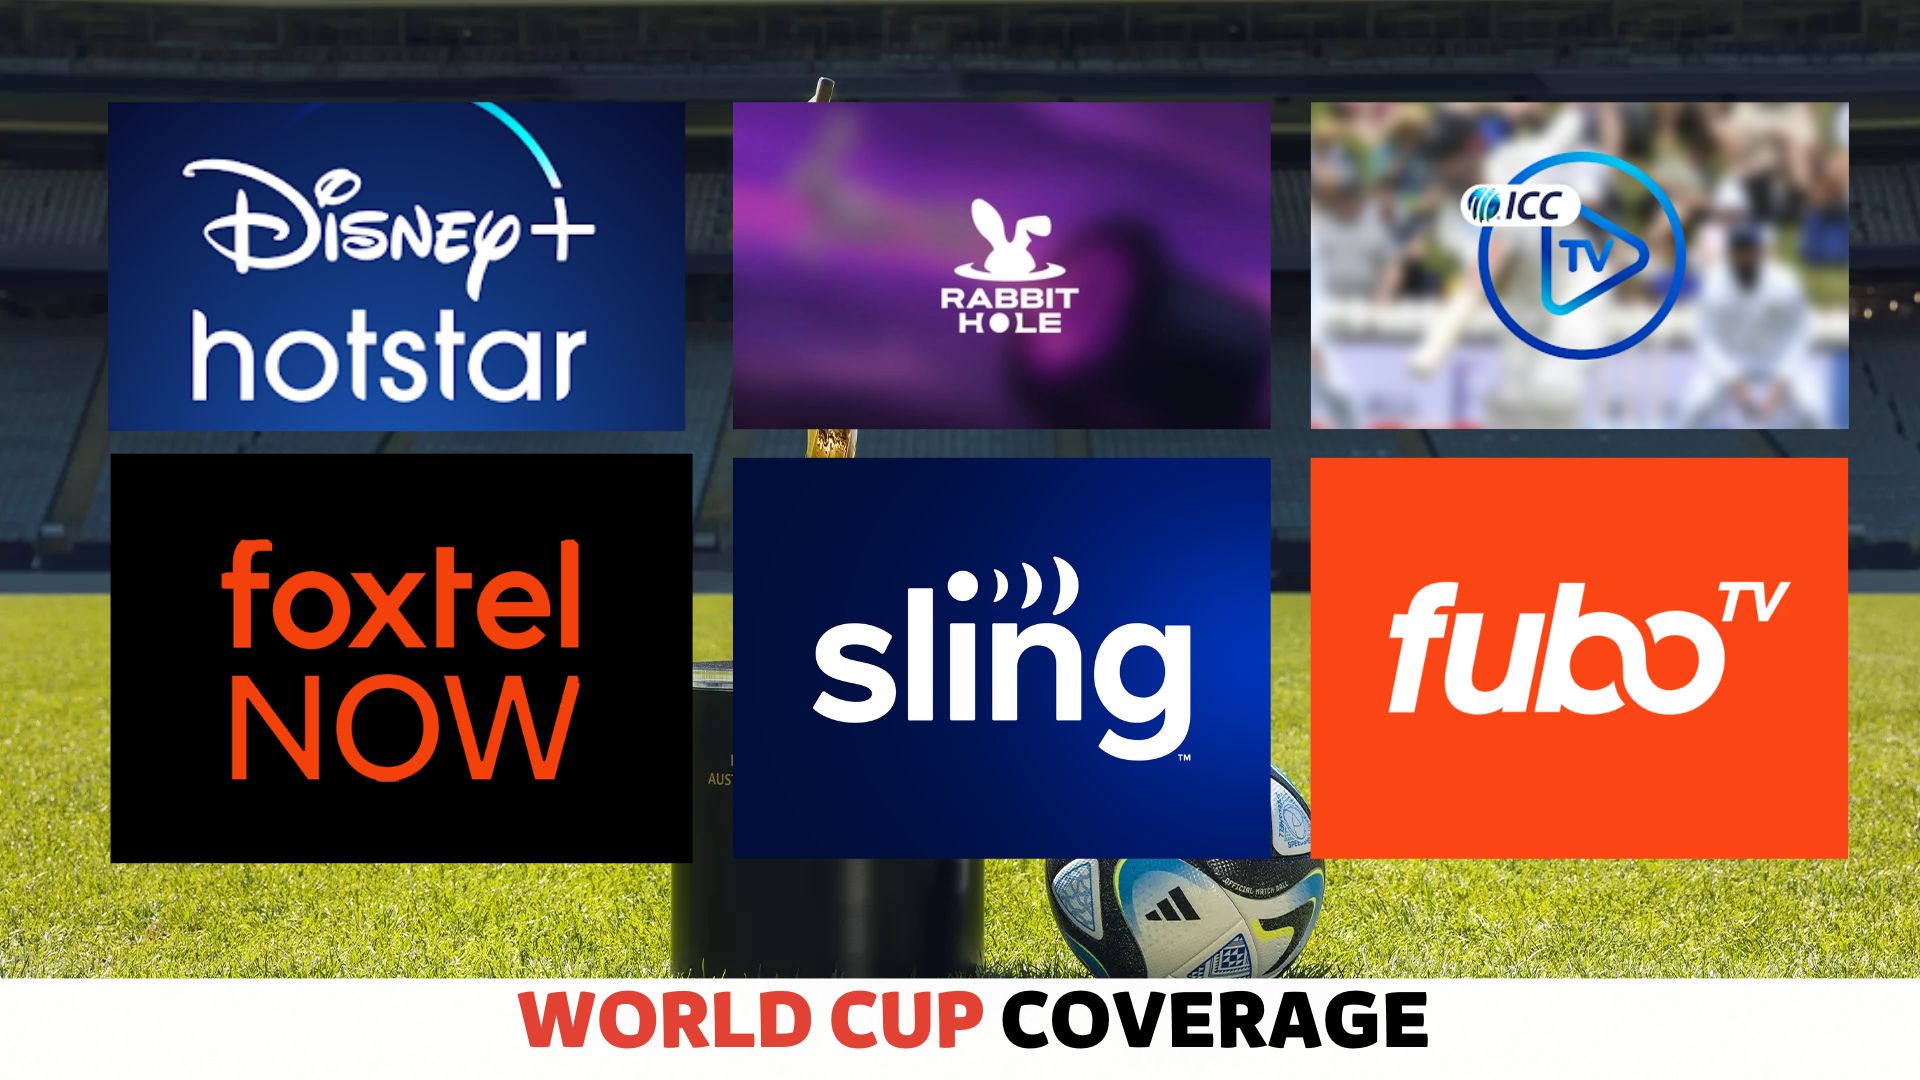 ICC Cricket World Cup Streaming Channels